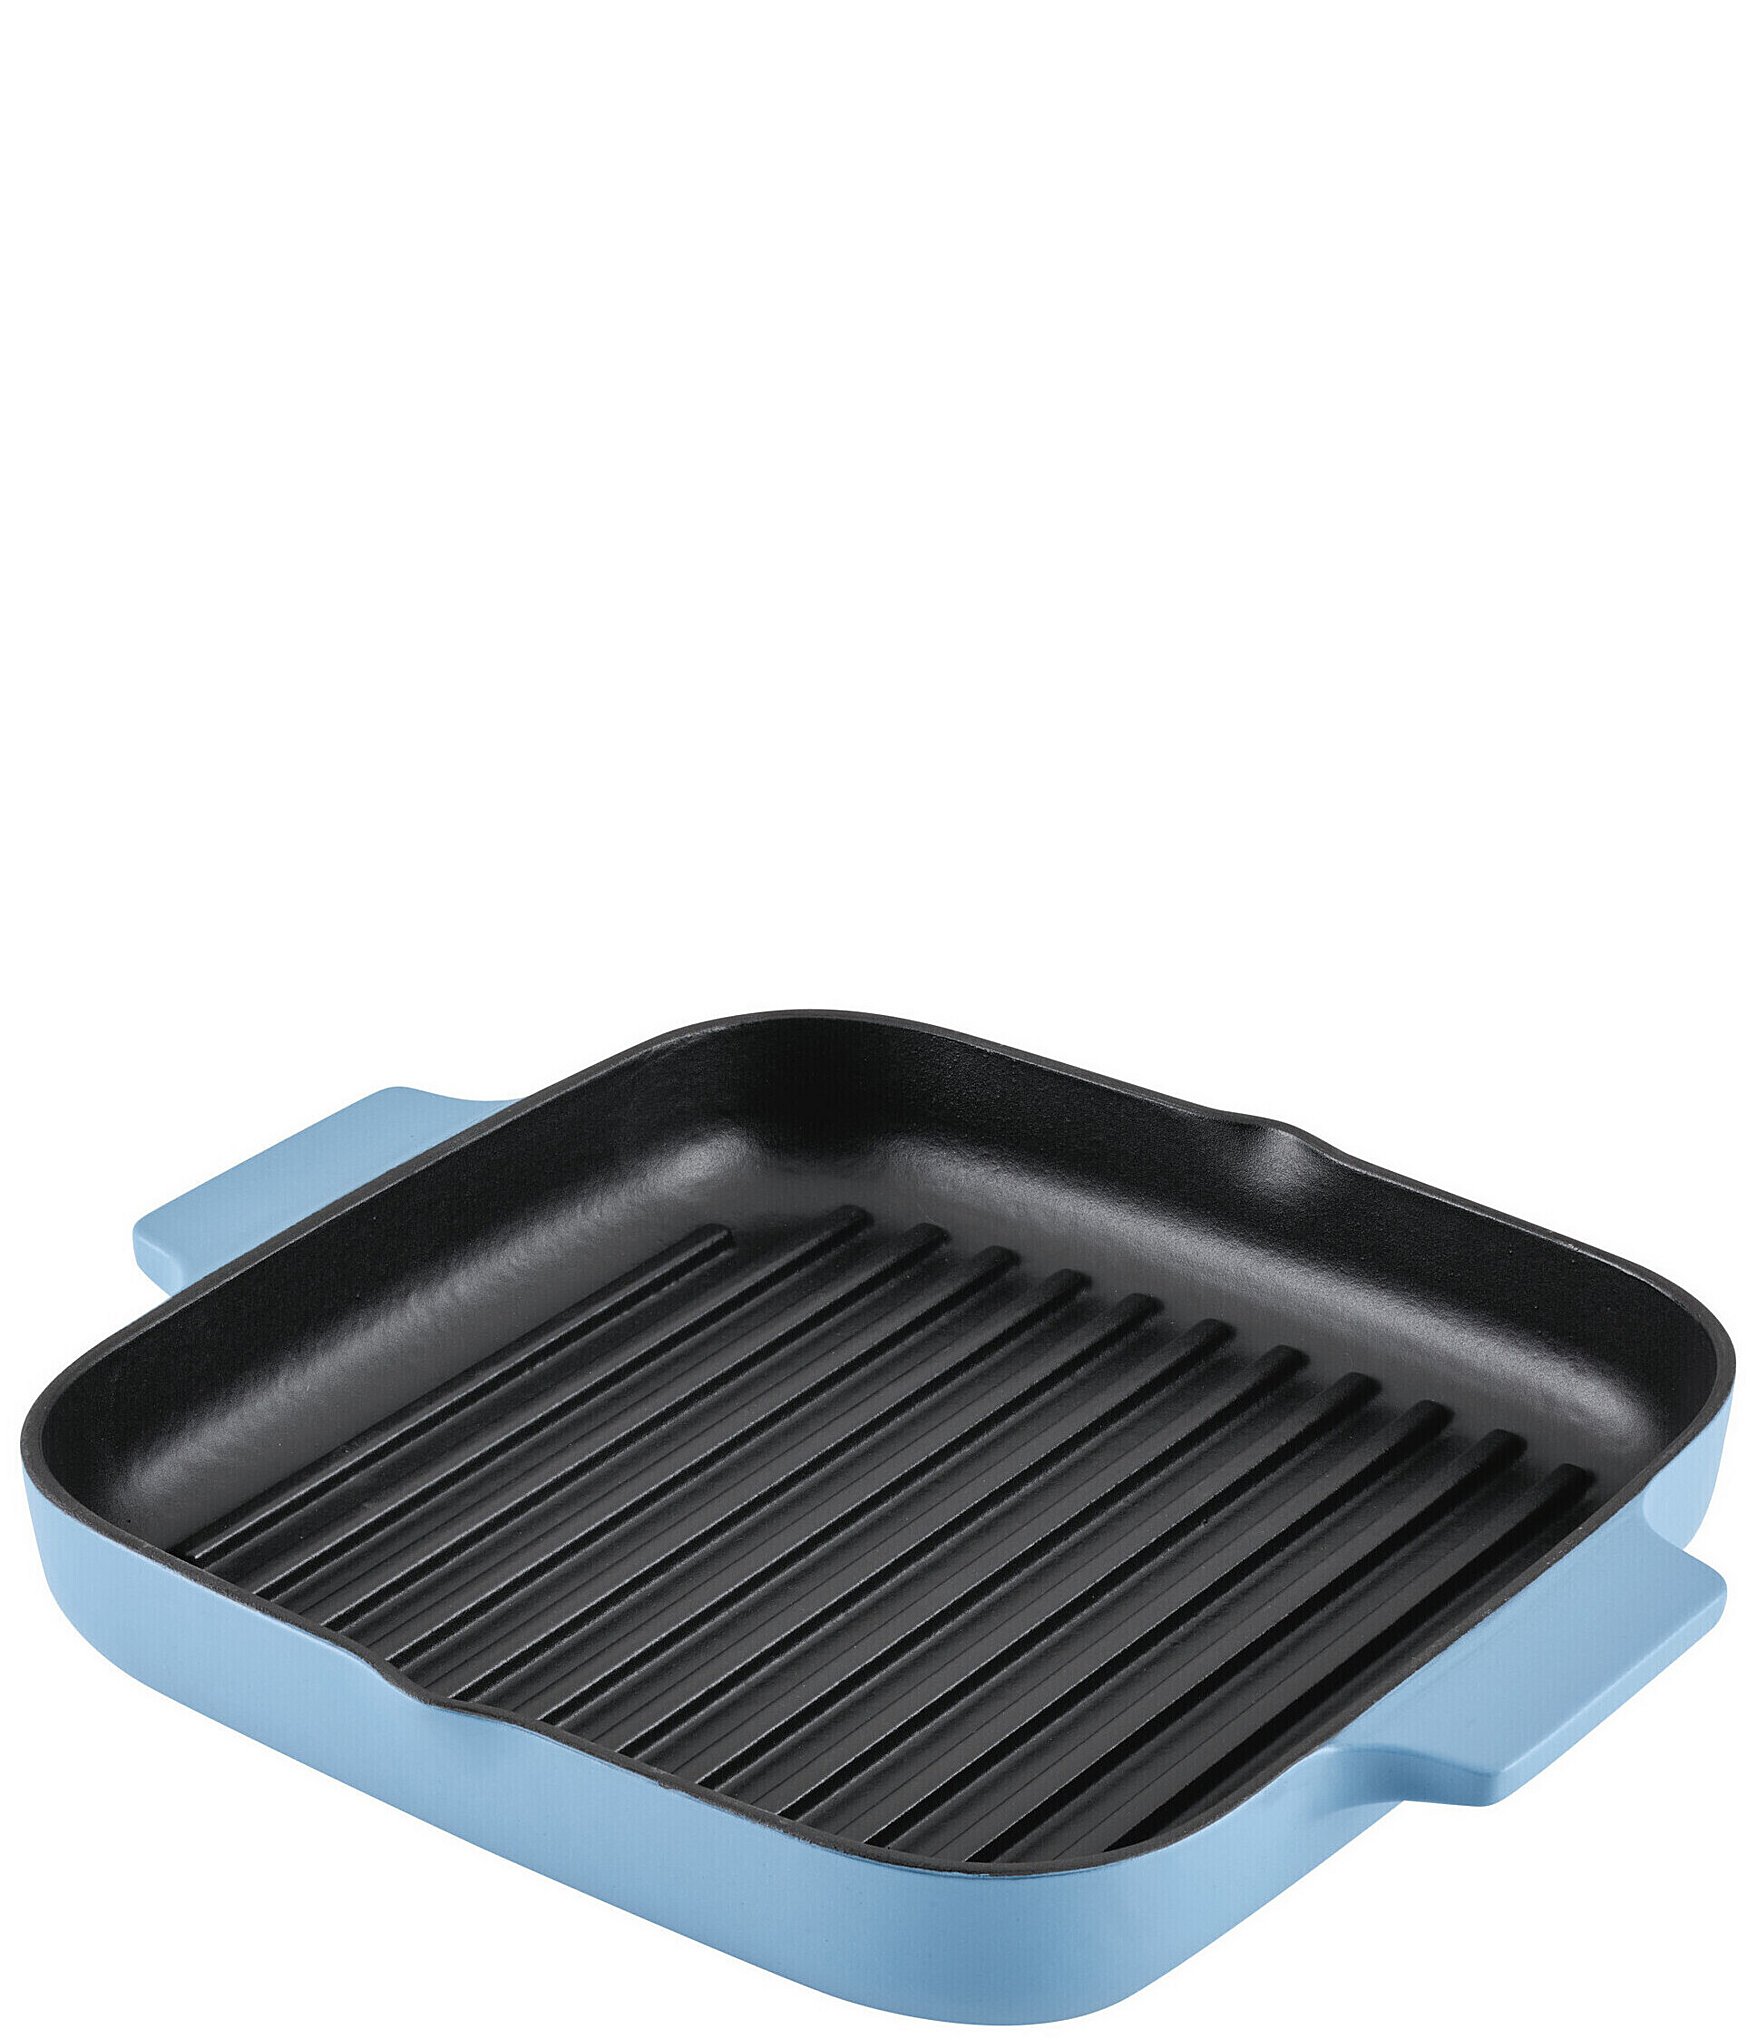 Lodge Chef Collection Griddle, Cast Iron, Chef Style, Square, 11 Inch